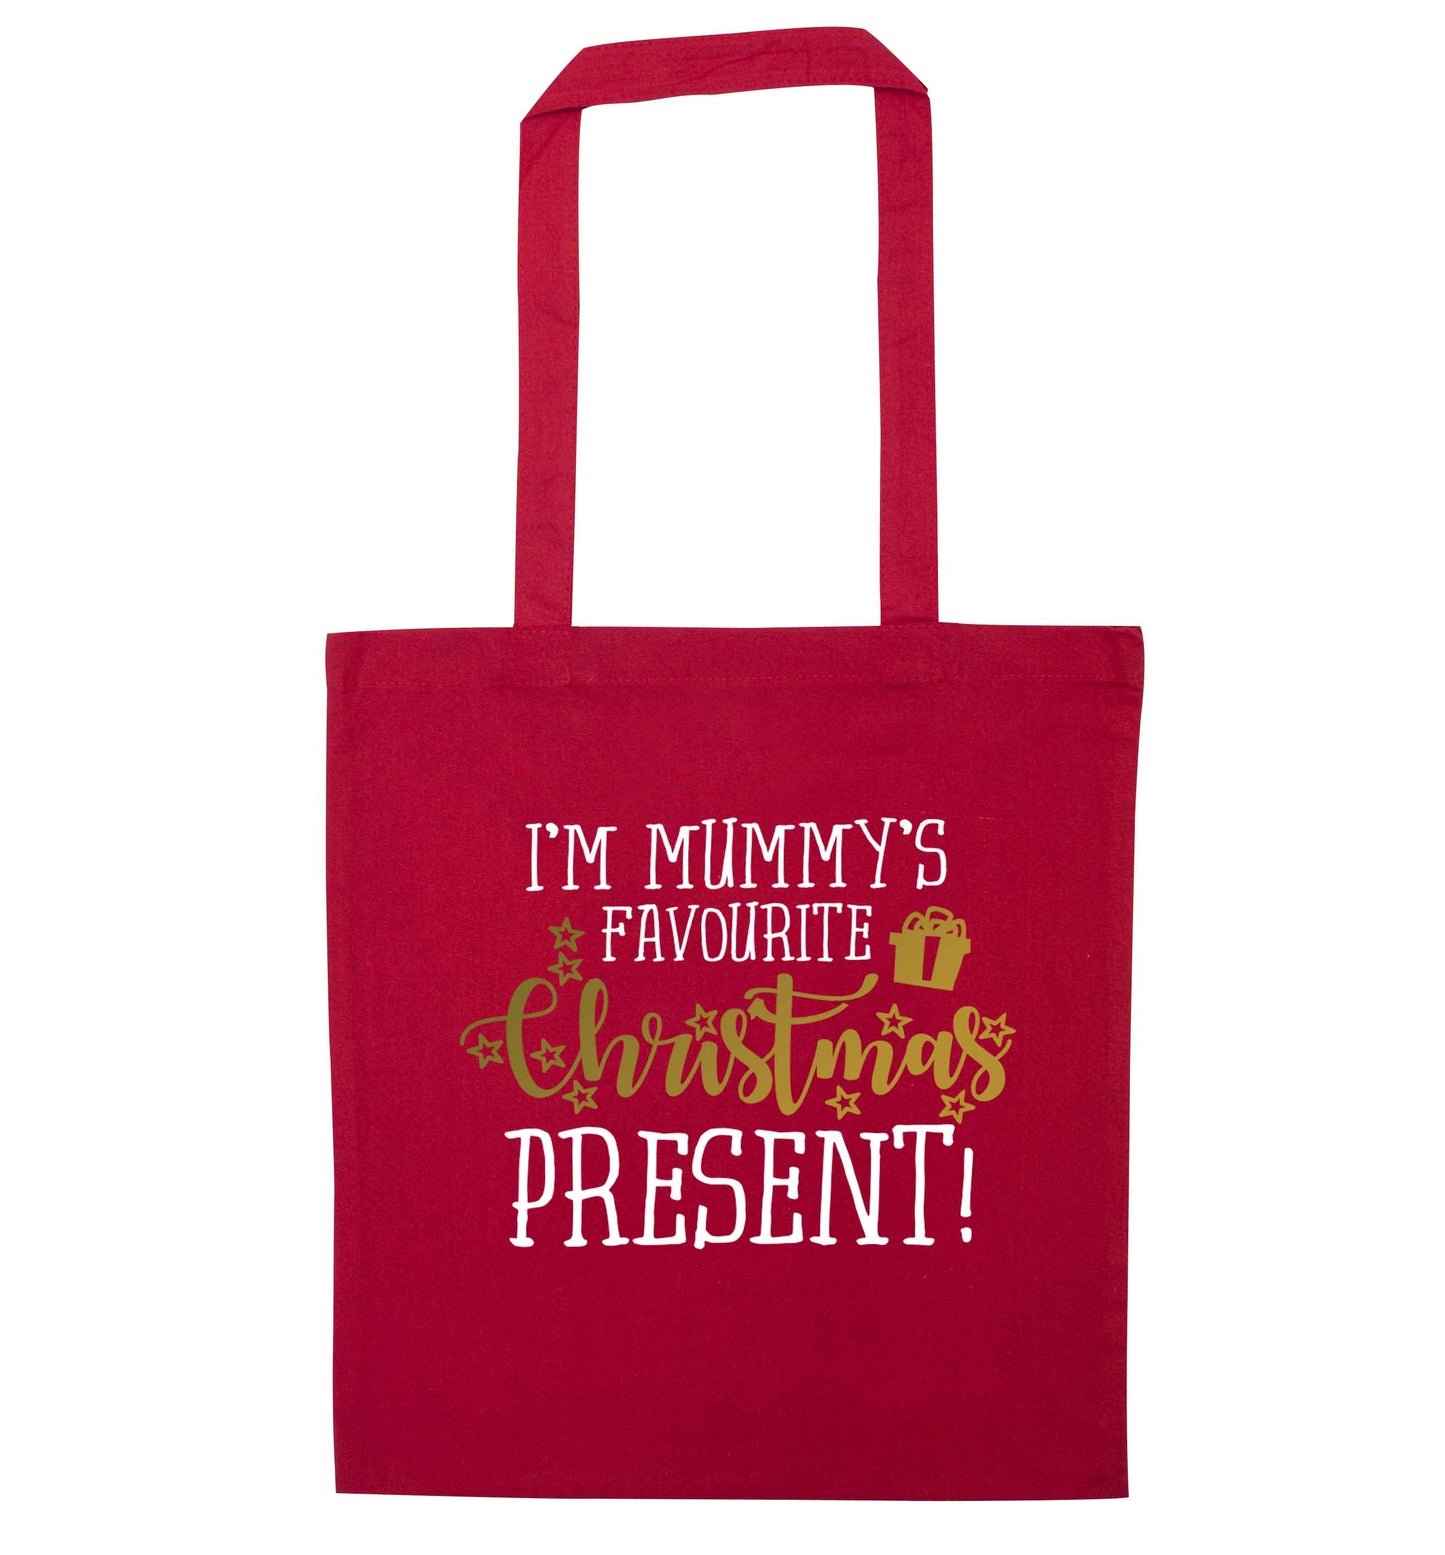 I'm Mummy's favourite Christmas present red tote bag